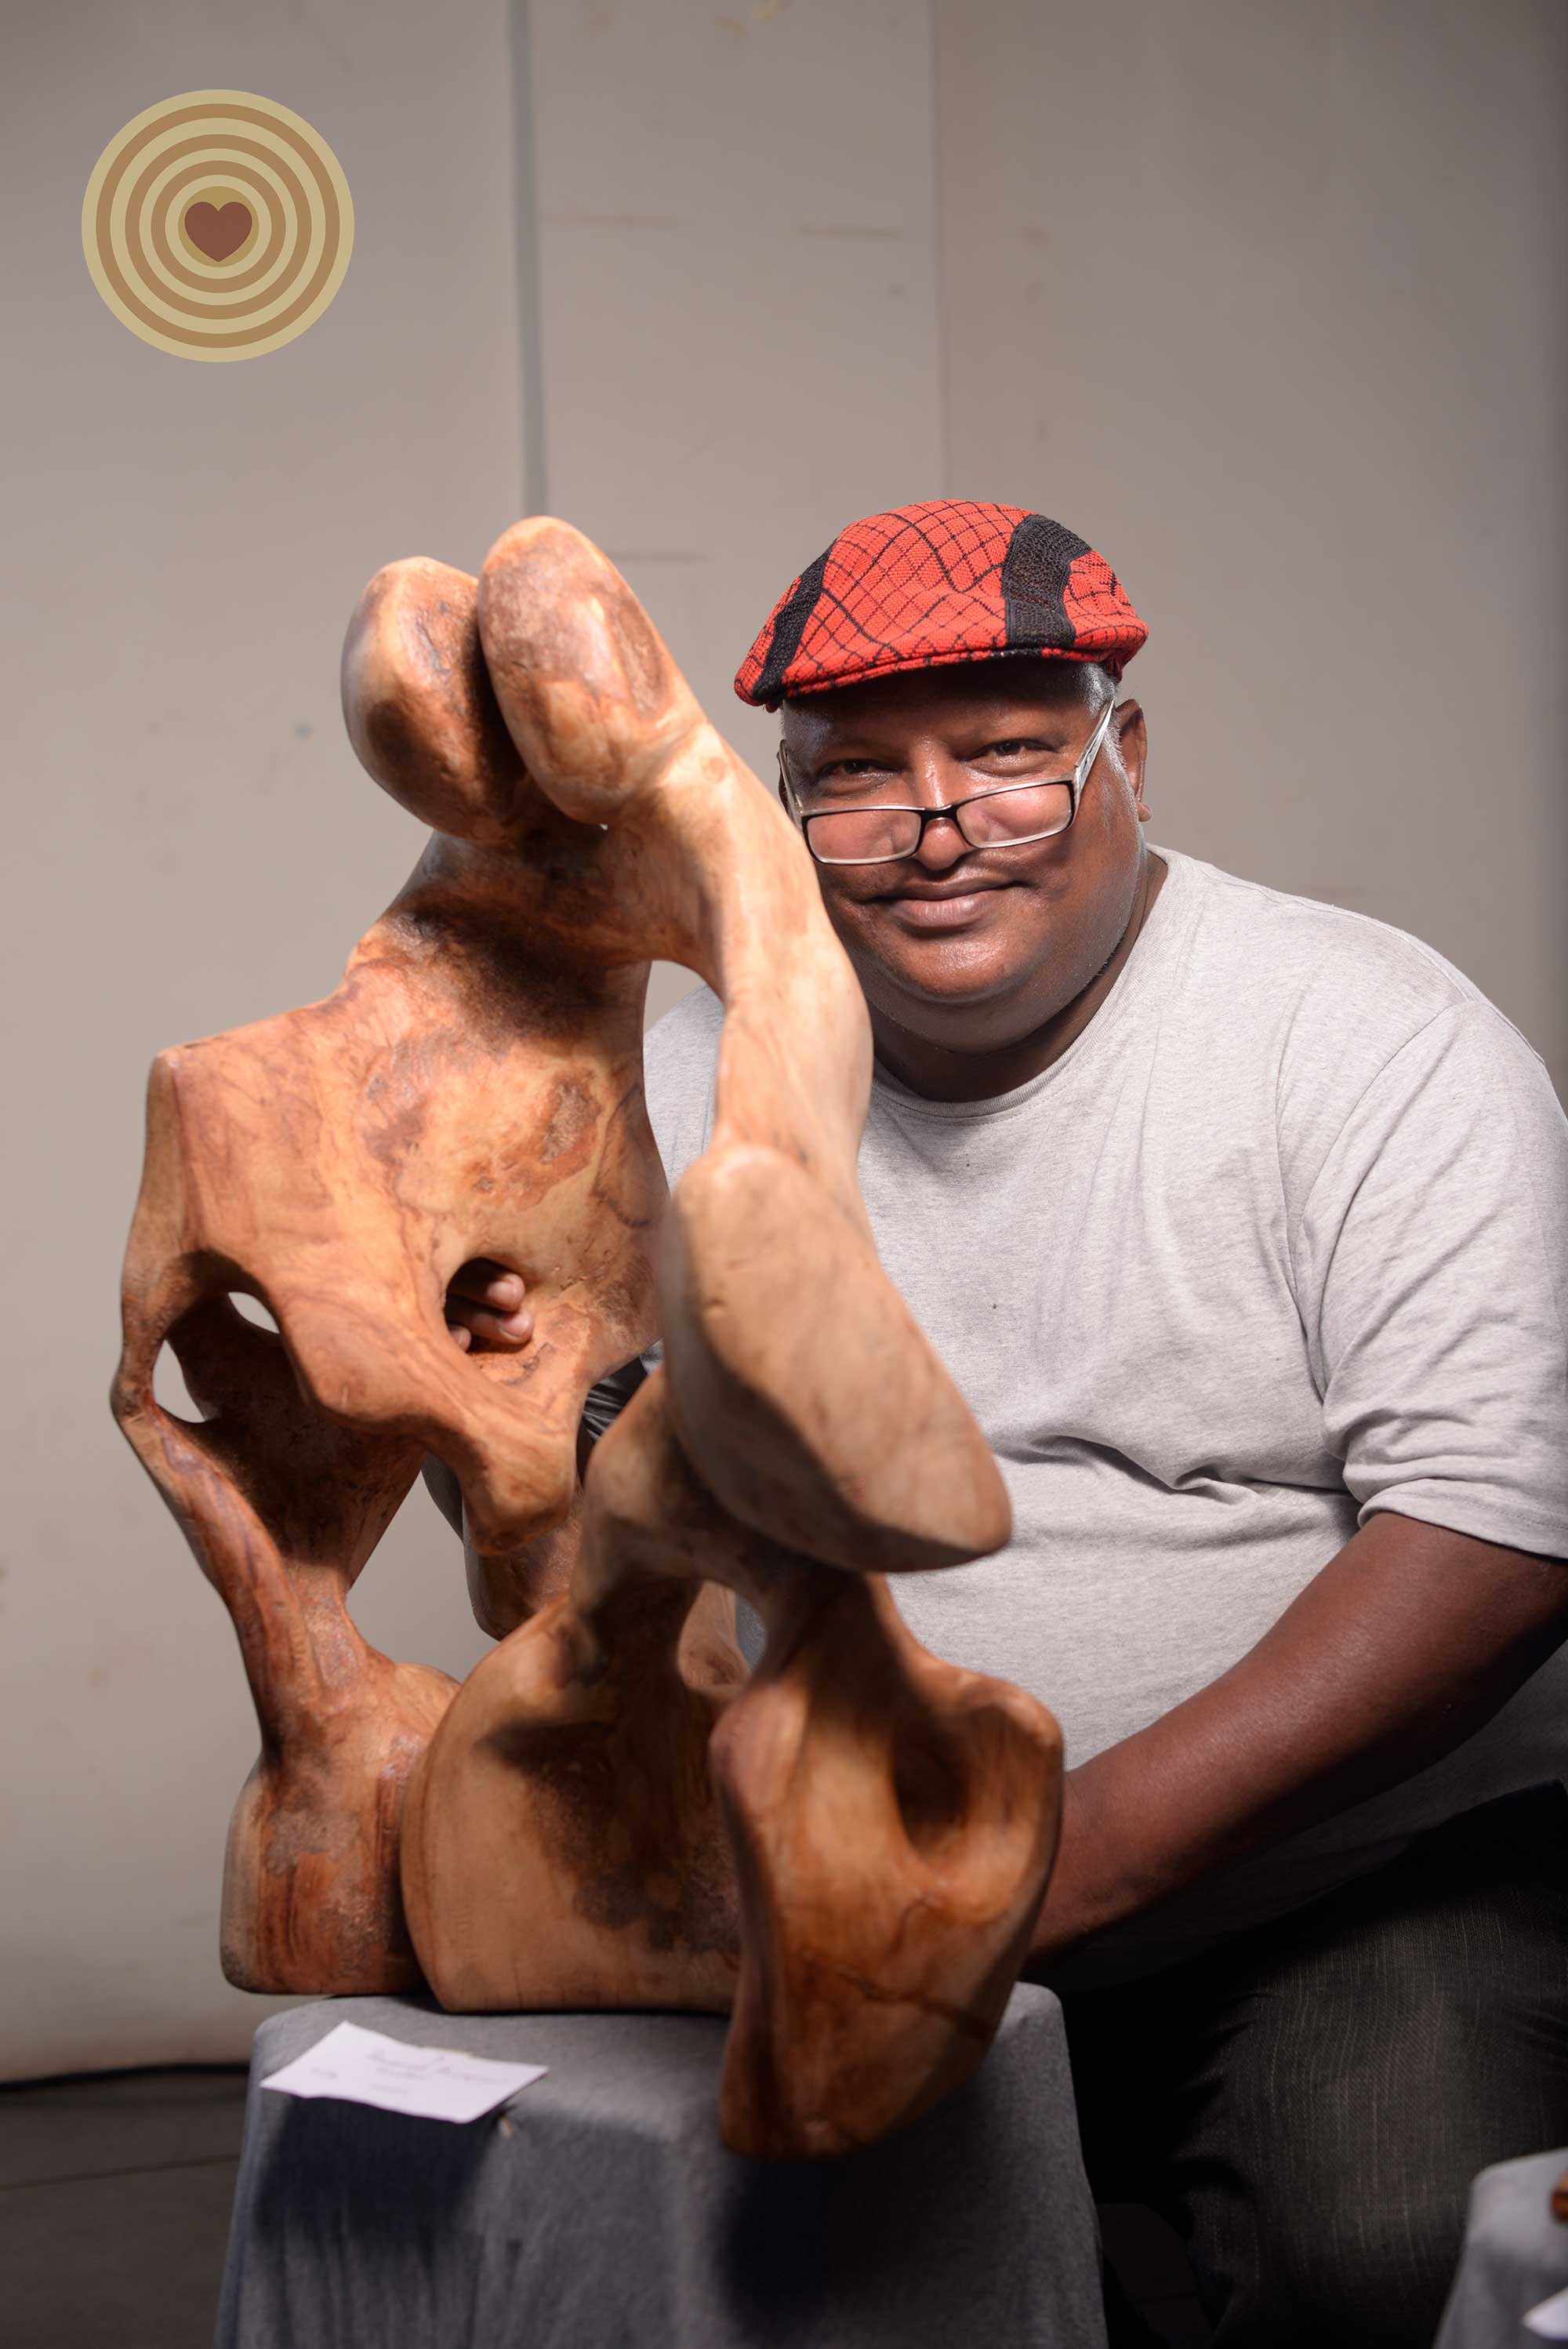 2020 WWD, regional event, Mauritius, woodcarving